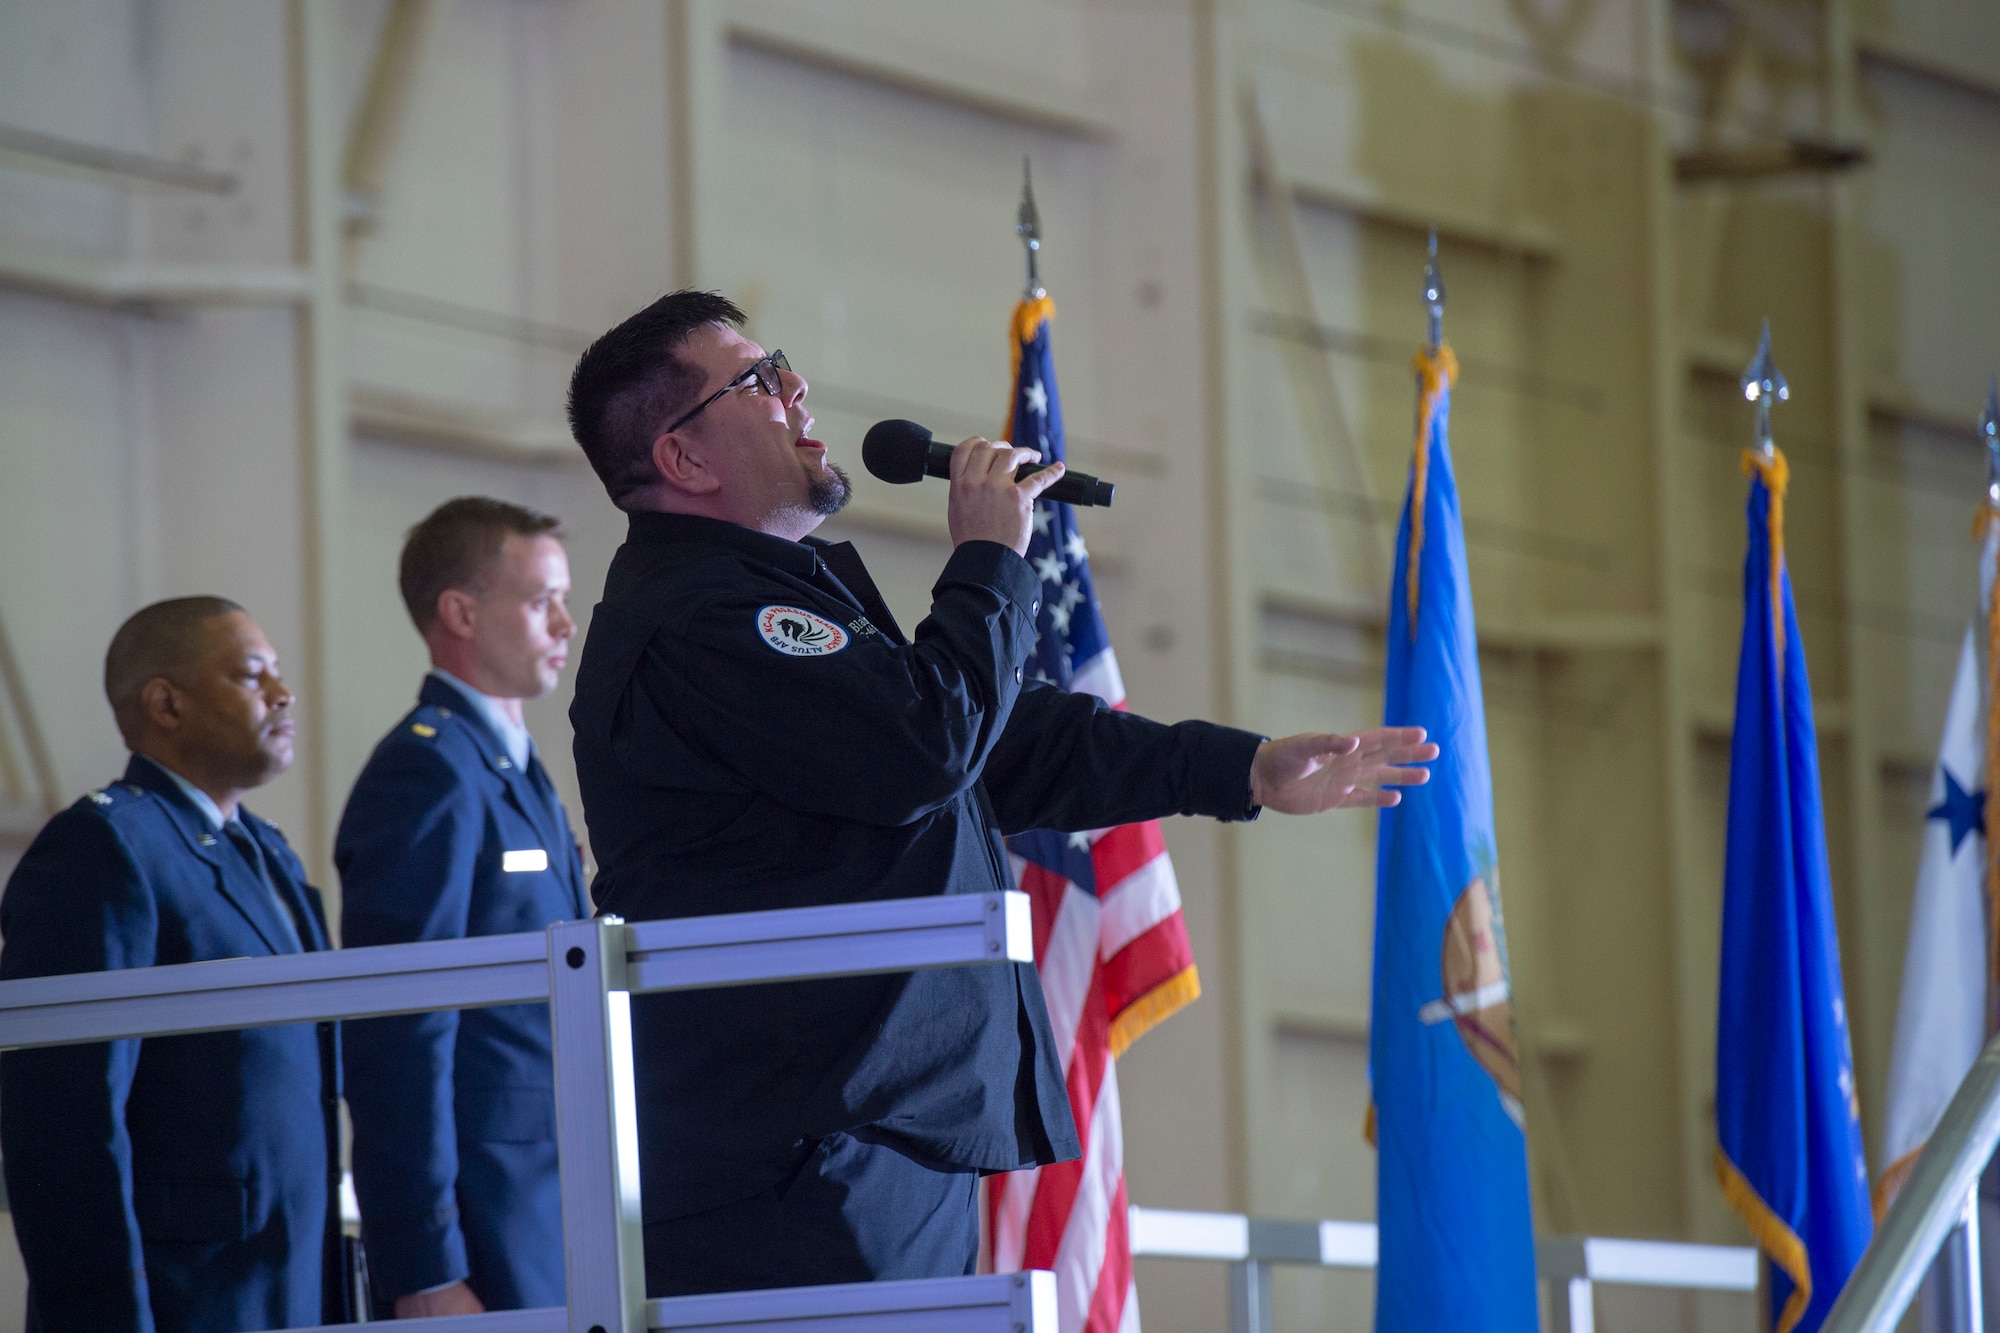 Blake Pewo, a KC-46A Pegasus mechanic from the 97th Maintenance Group, sings the national anthem during a welcoming ceremony for the delivery of the KC-46, Feb. 8, 2019, at Altus Air Force Base, Okla.  Global air refueling is the foundation of global mobility and the bedrock of the nation’s ability to deploy forces. (U.S. Air Force Photo by Senior Airman Jackson N. Haddon)